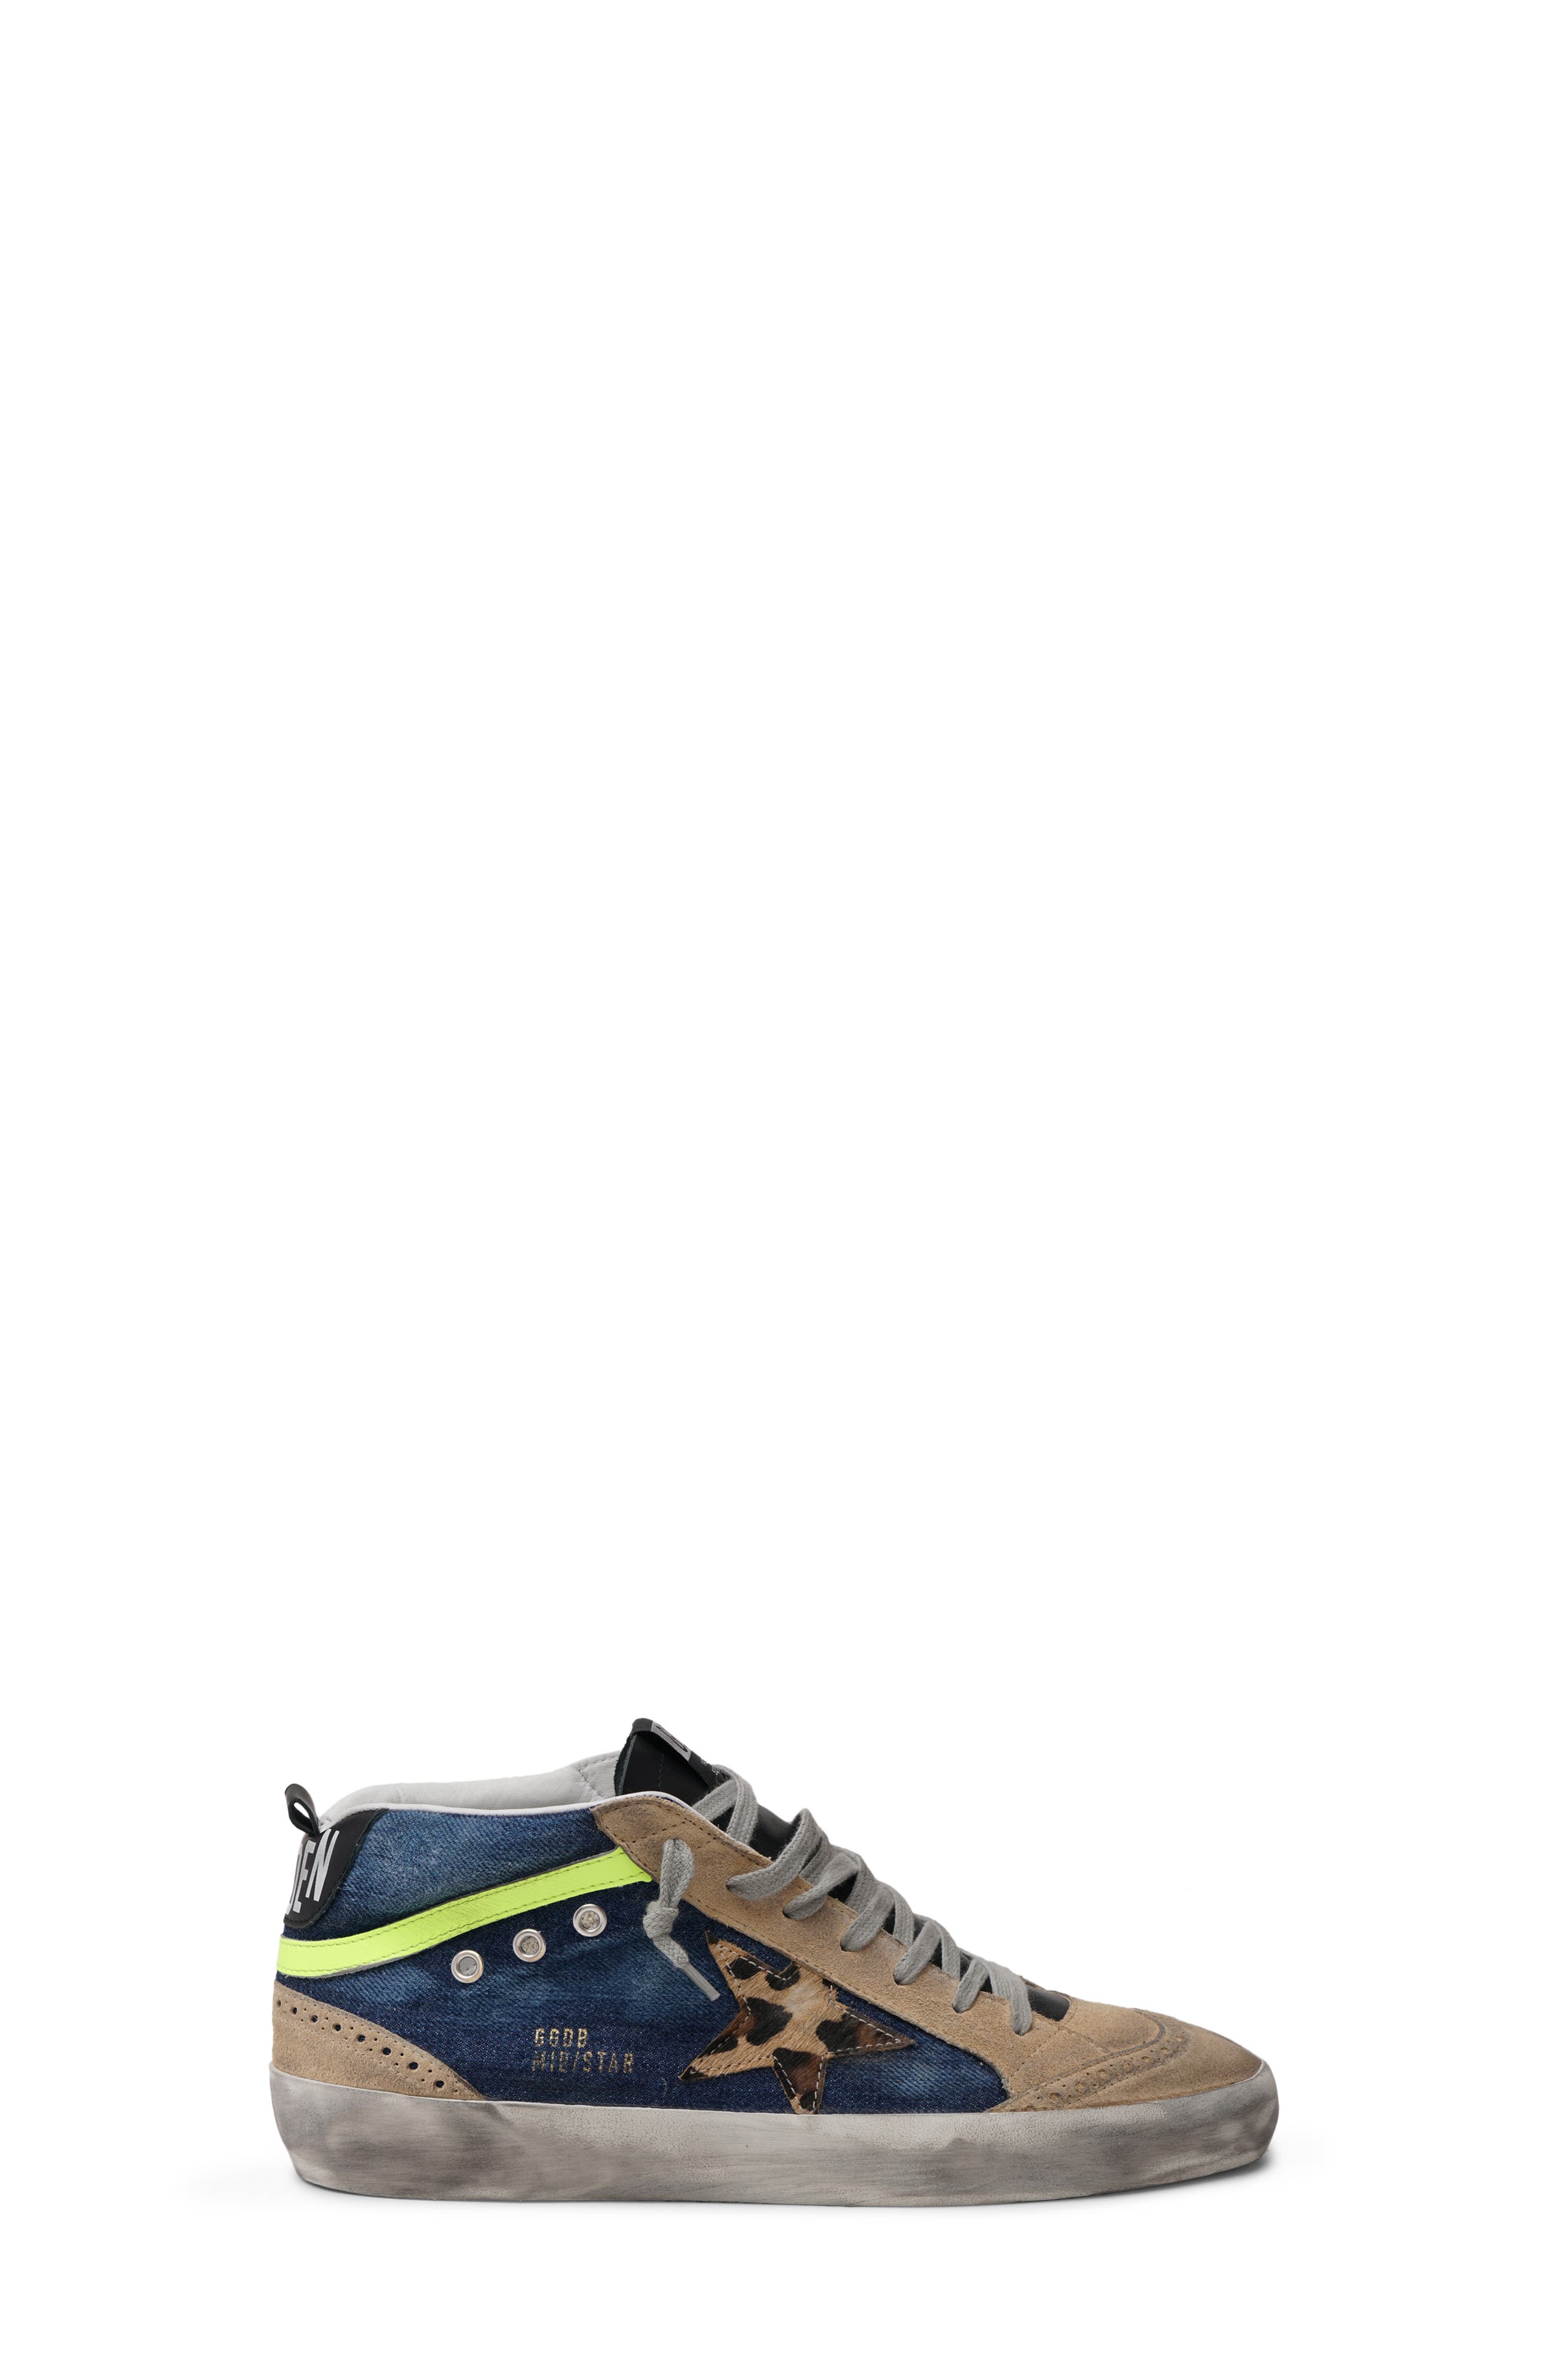 Golden Goose Mid Star Genuine Calf Hair Sneaker in Dark Blue/Cappuccino/Brown at Nordstrom, Size 13Us